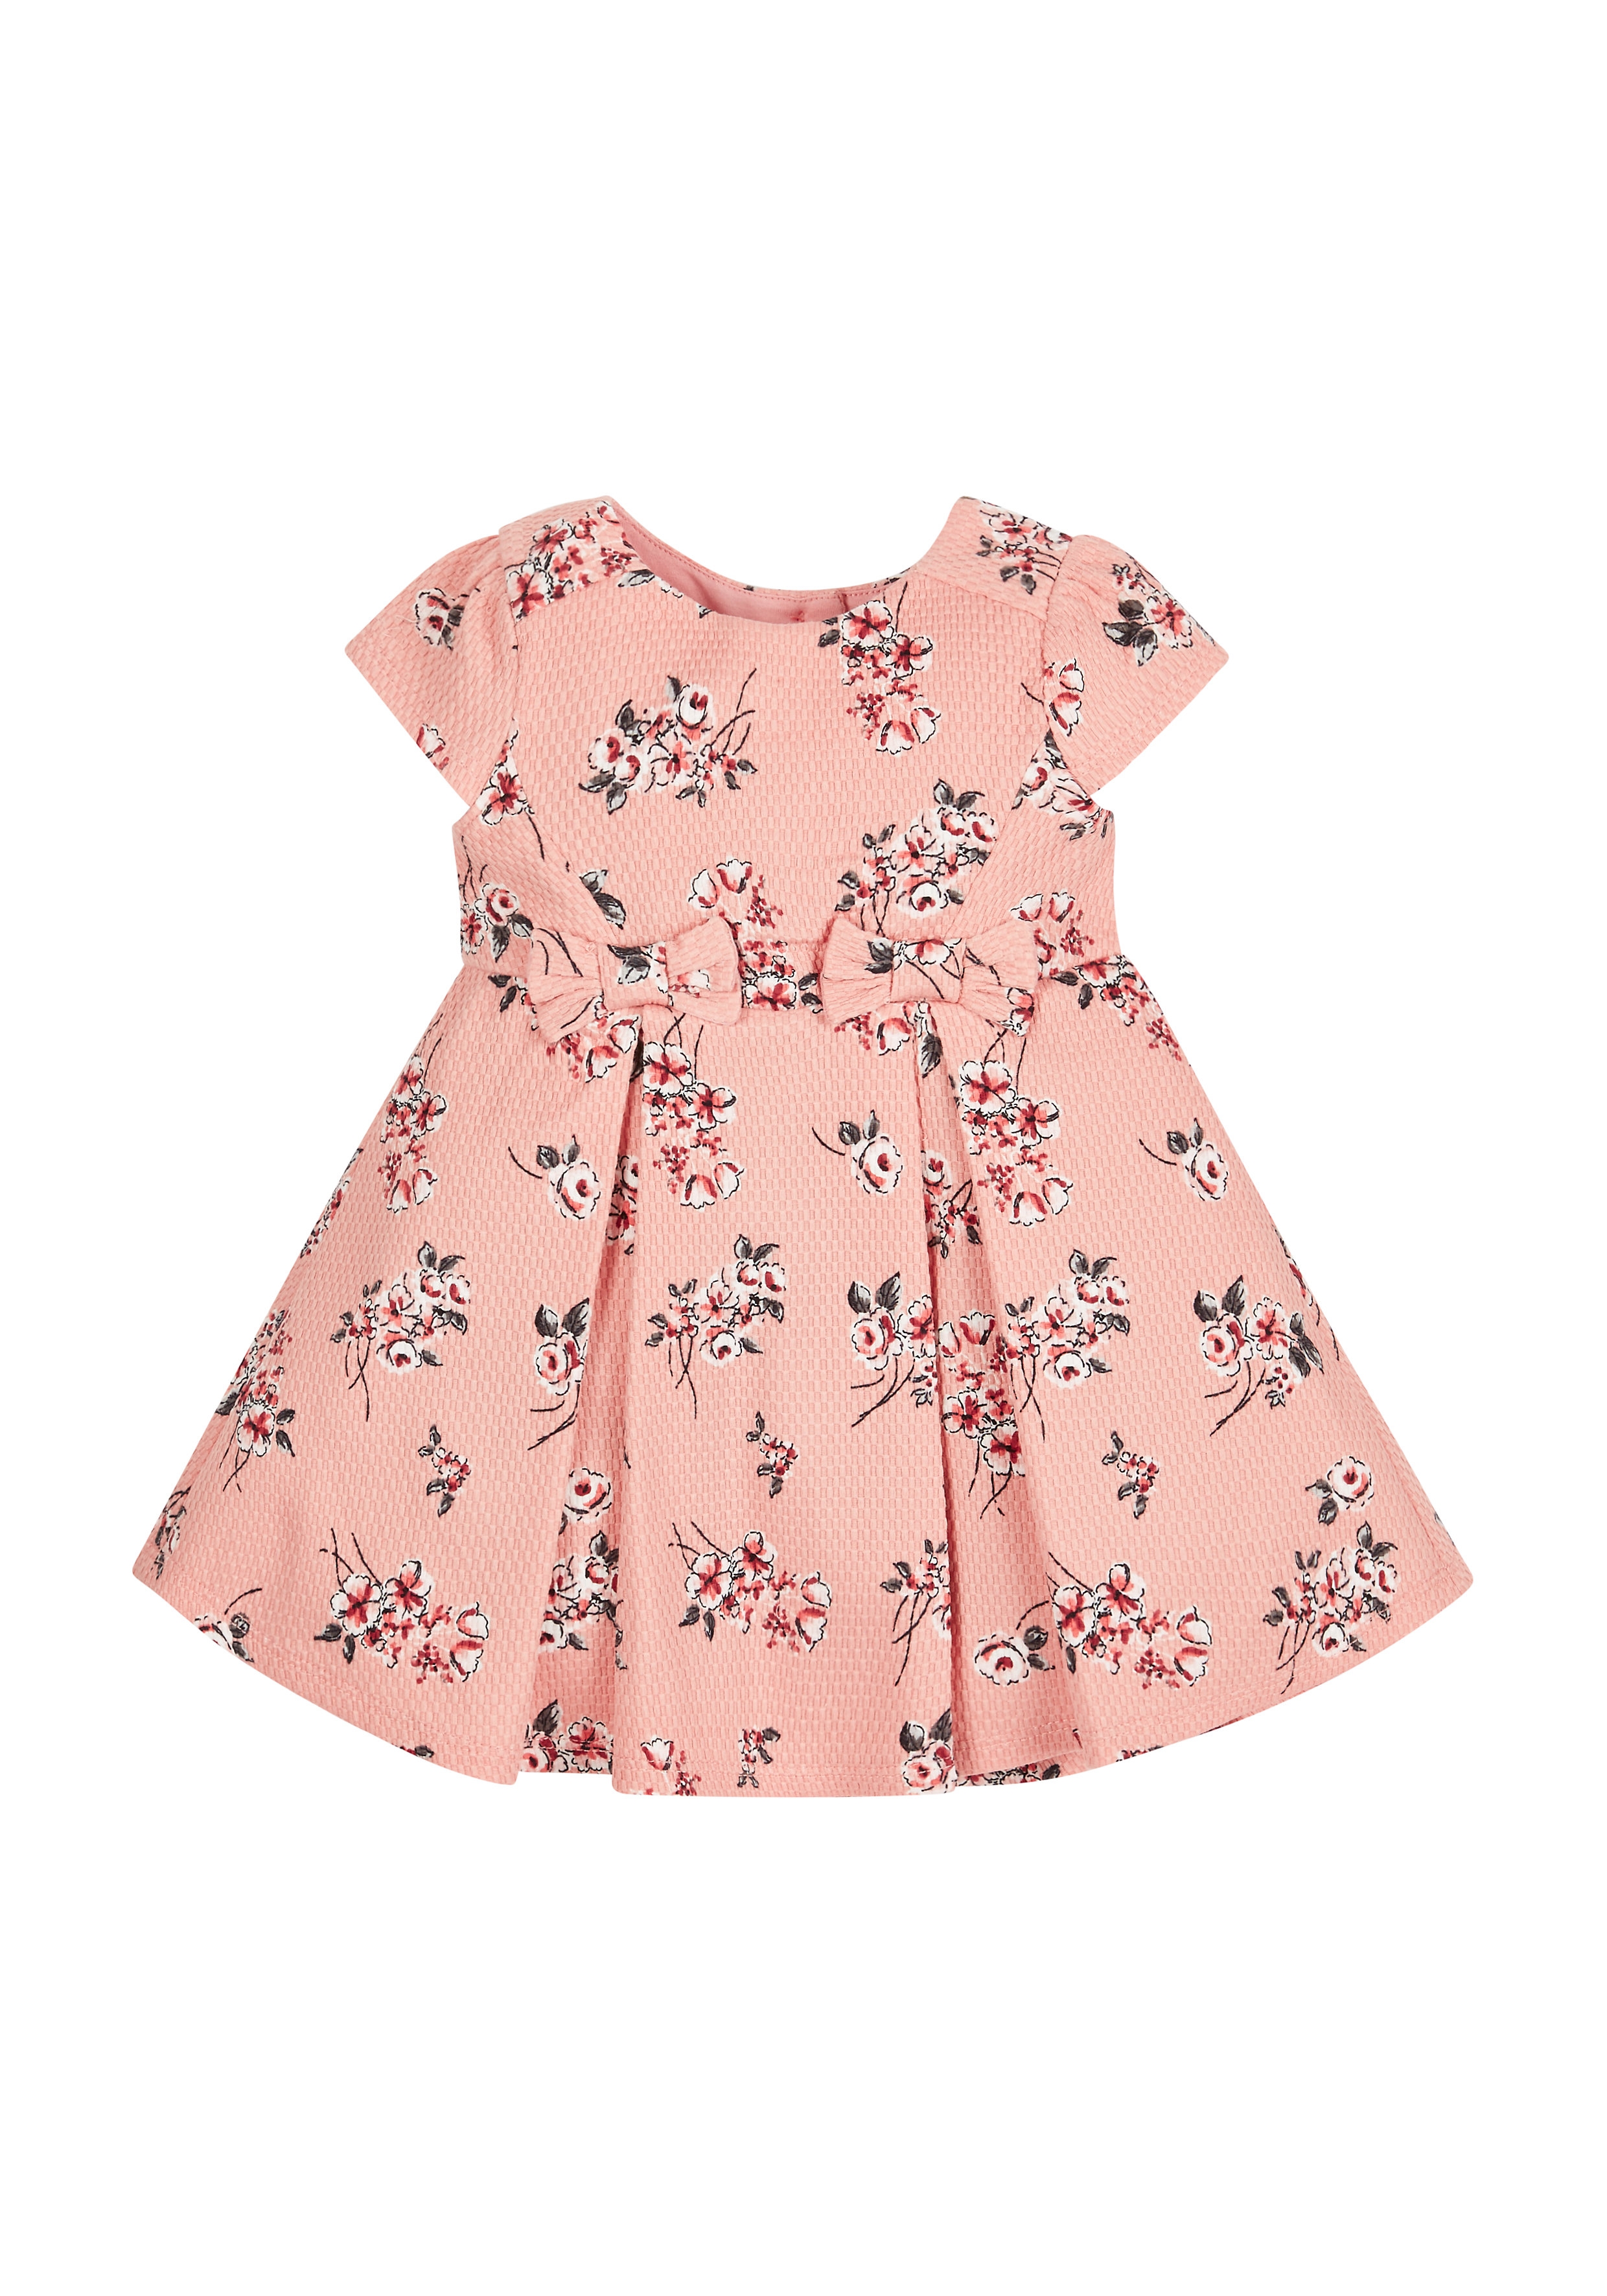 Mothercare | Girls Half Sleeves Dress Bow Detail - Pink